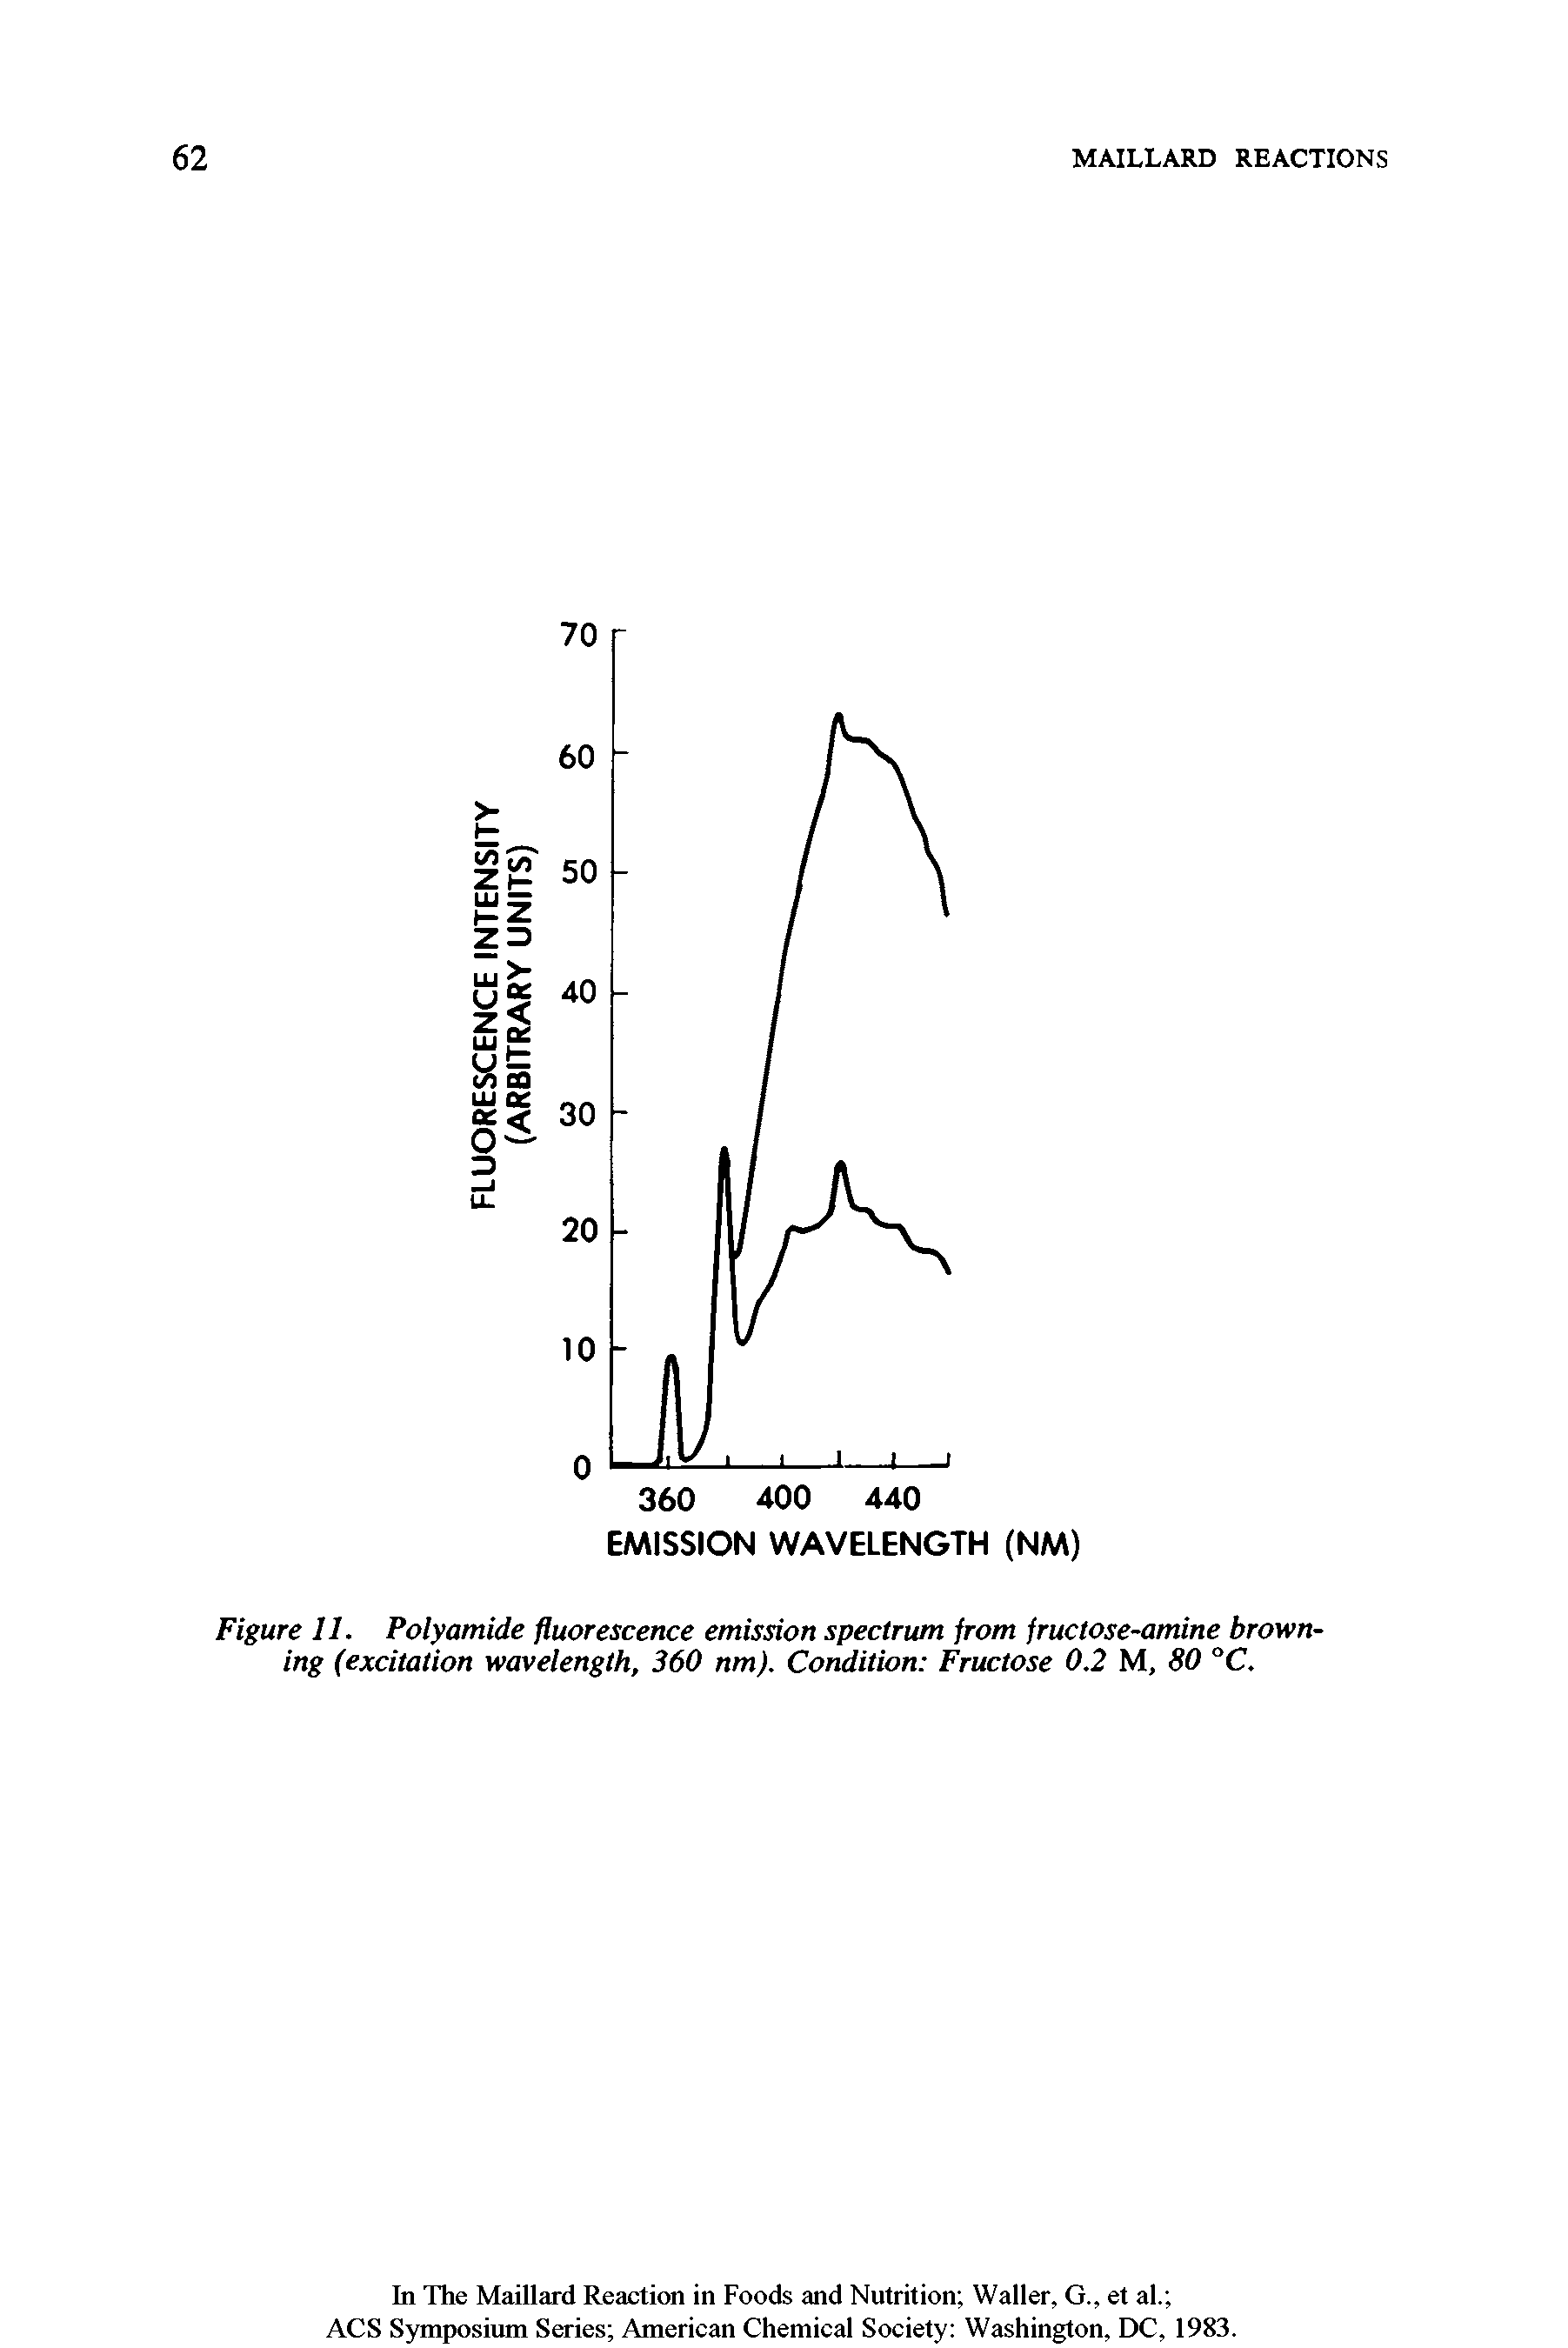 Figure 11. Polyamide fluorescence emission spectrum from fructose-amine browning (excitation wavelength, 360 nm). Condition Fructose 0.2 M, 80 °C.